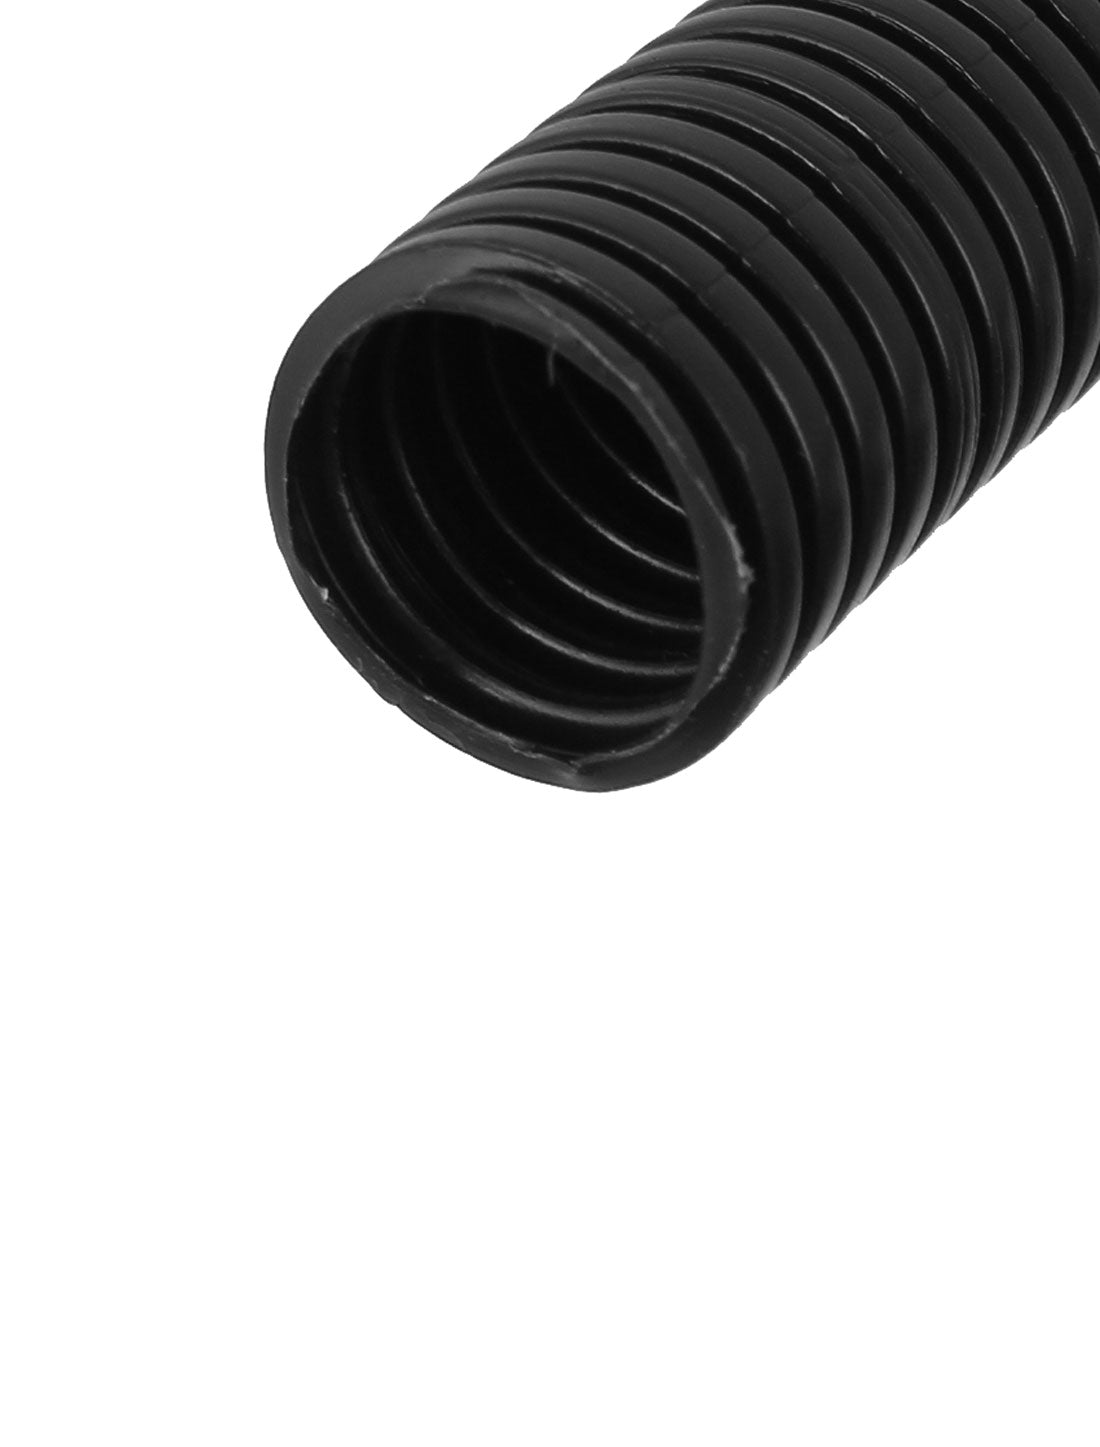 uxcell Uxcell 7 M 21 x 25 mm Nylon Flexible Corrugated Conduit Tube for Garden,Office Black